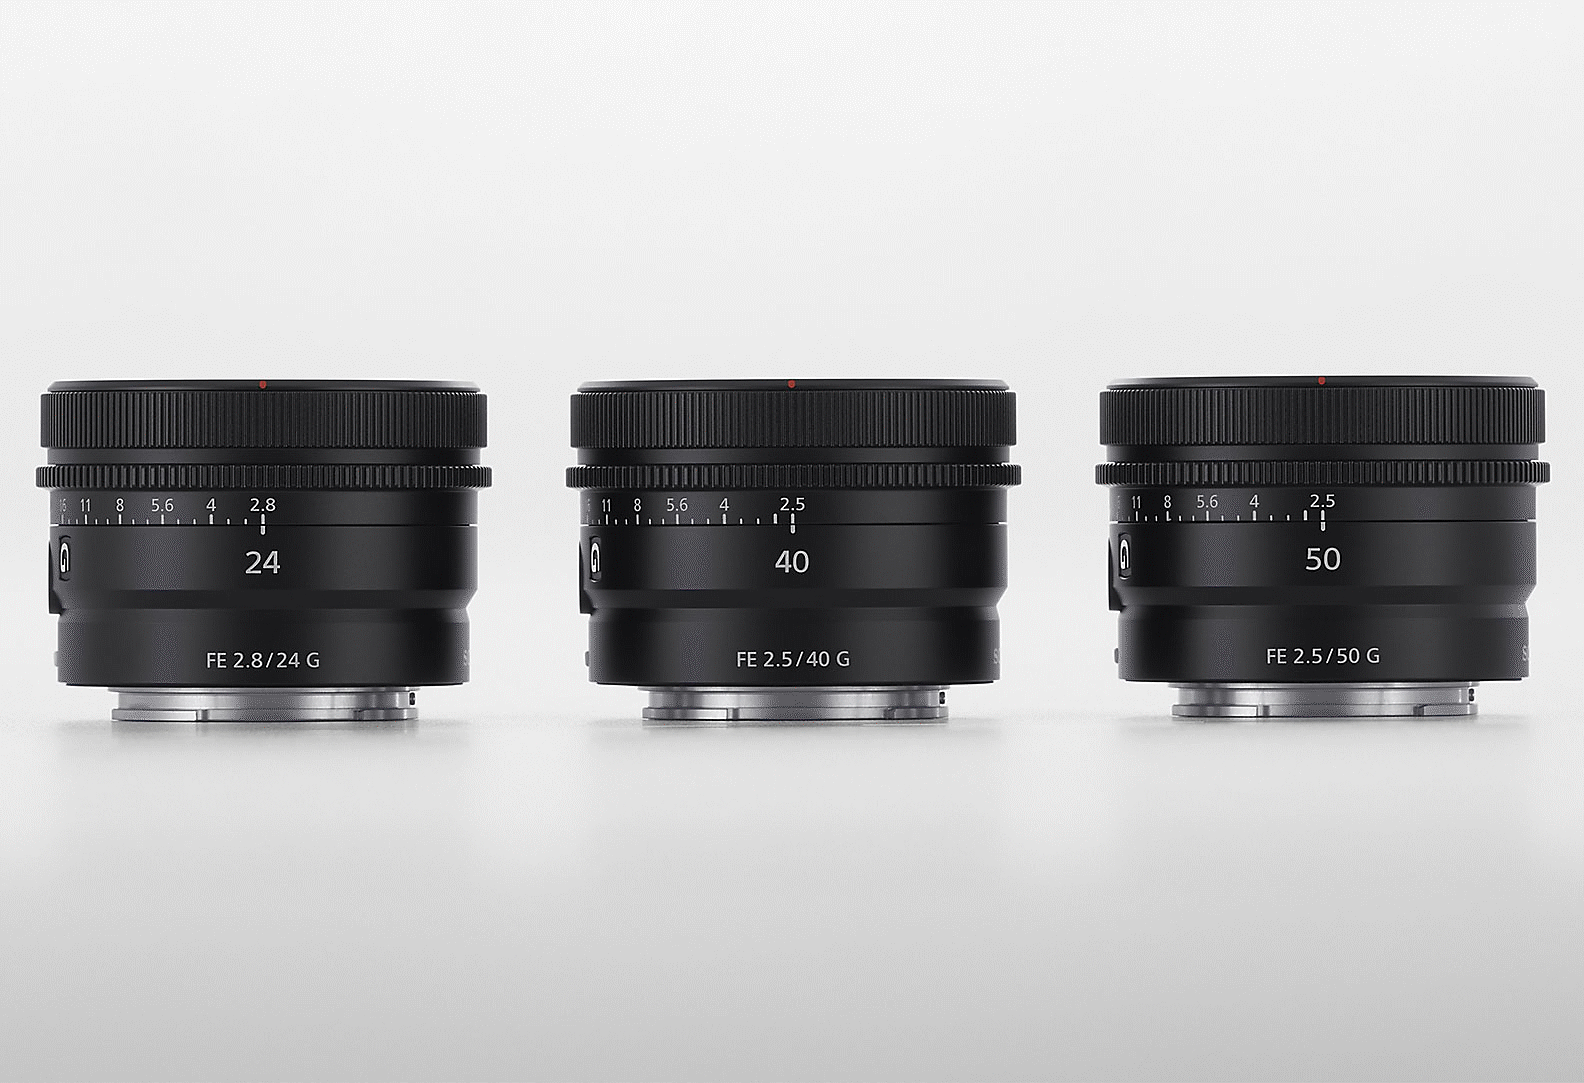 Product image showing three nearly identical-looking lenses